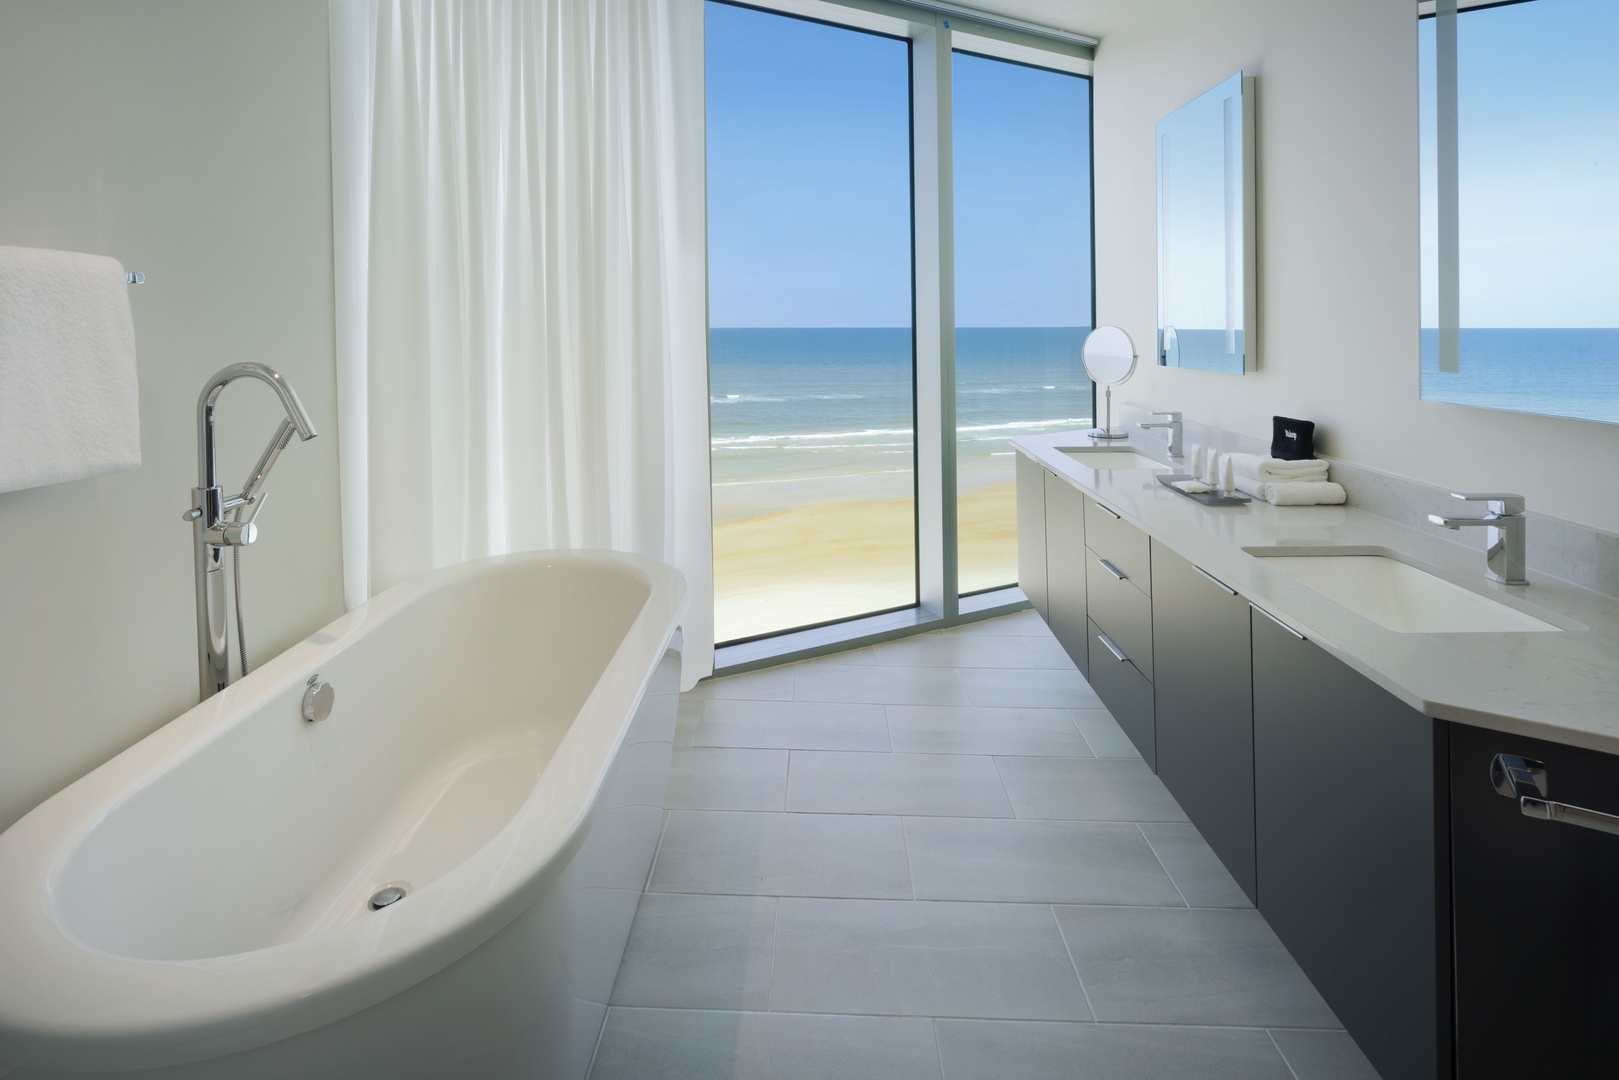 Bathe with a View: Enjoy Scenic Beauty as You Rejuvenate in the Tub